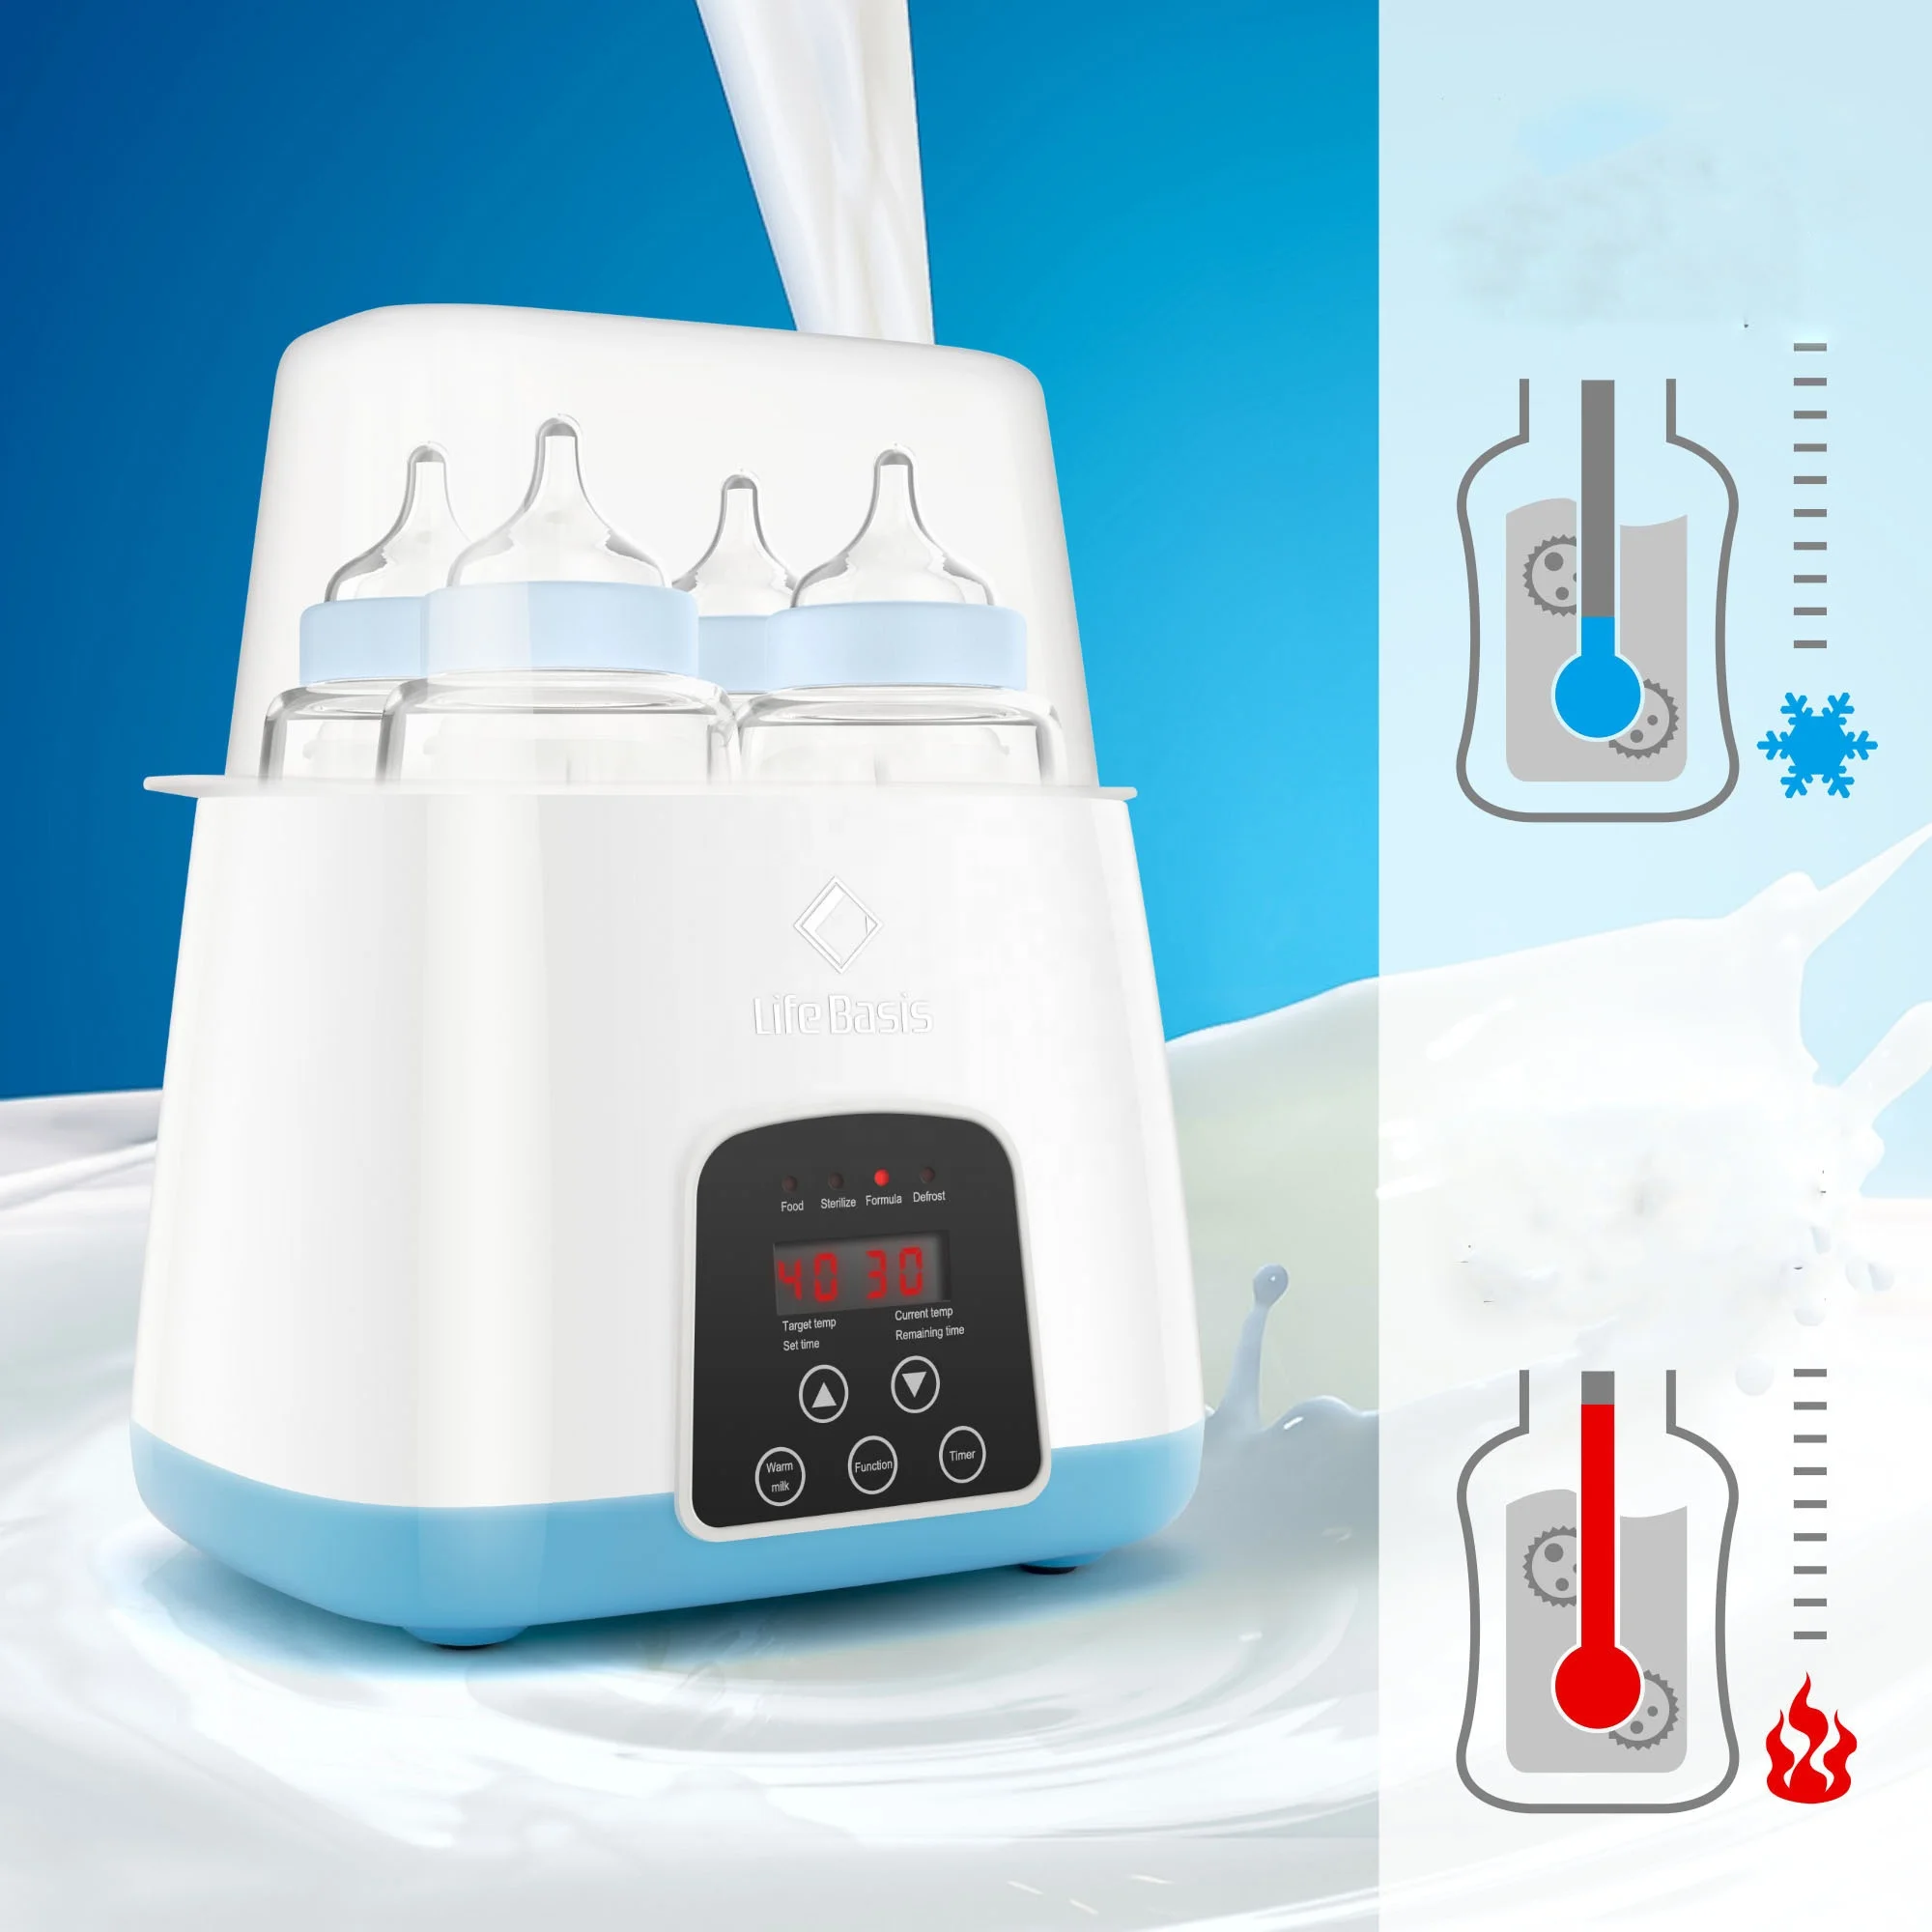 Multifunction electric baby bottle warmer with sterilizer and dryer